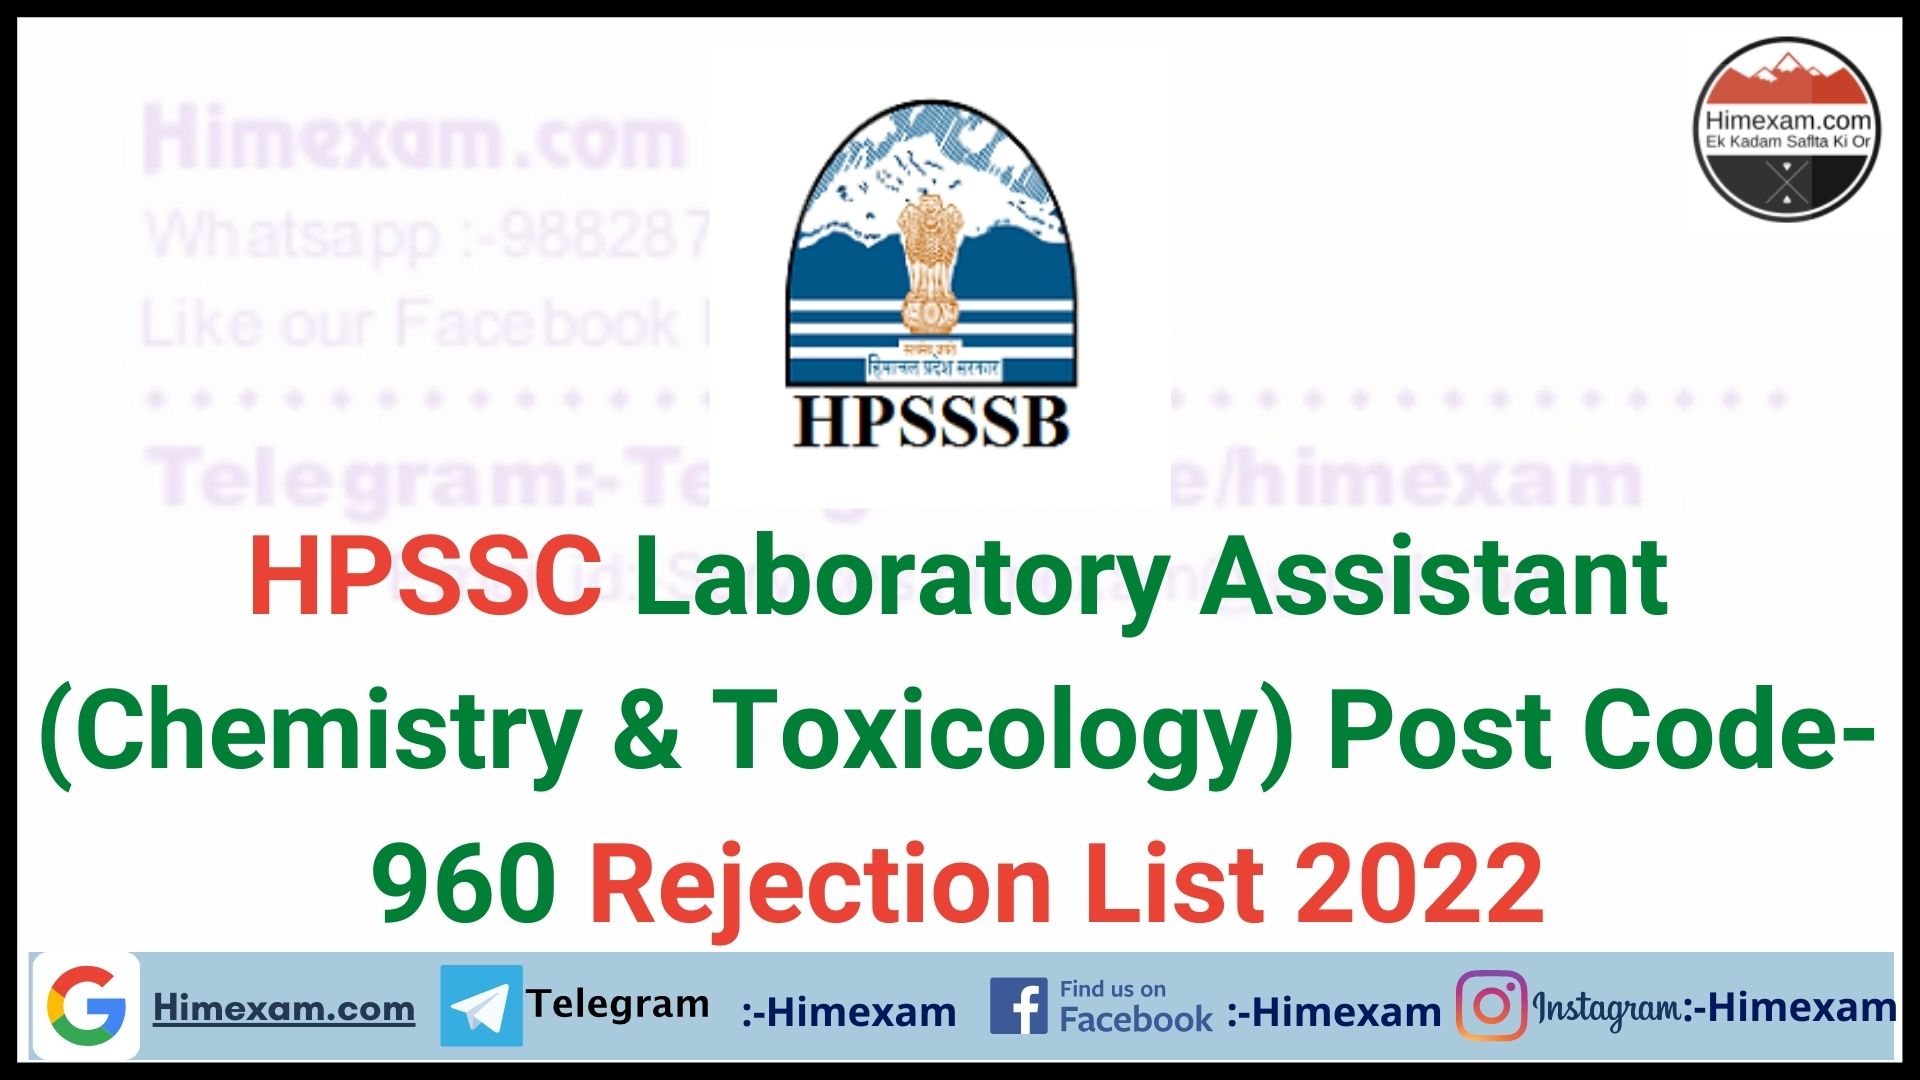 HPSSC Laboratory Assistant (Chemistry & Toxicology) Post Code-960 Rejection List 2022